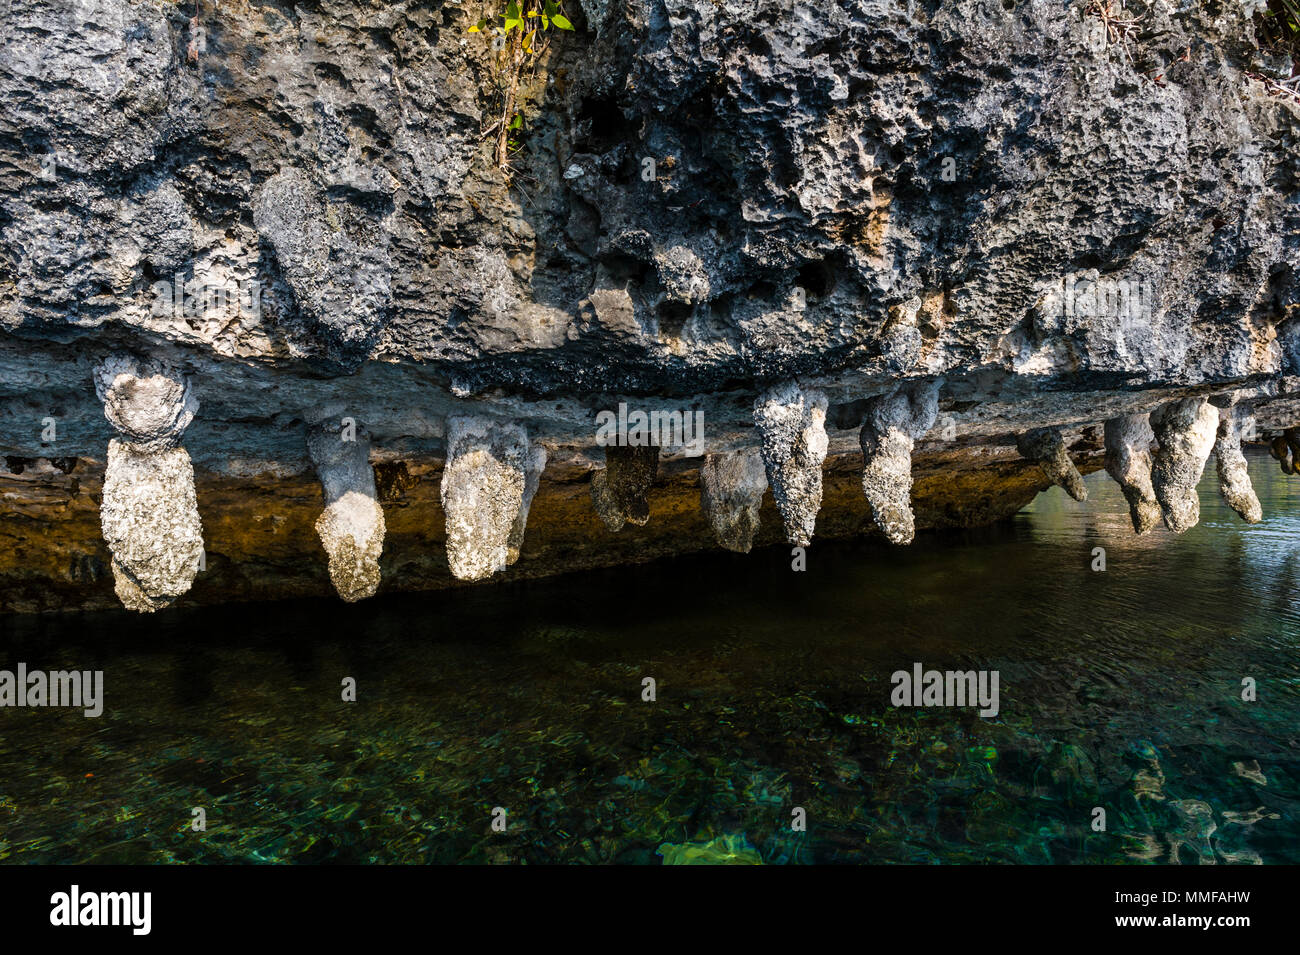 Calcium and mineral deposits hanging from a limestone cliff. Stock Photo